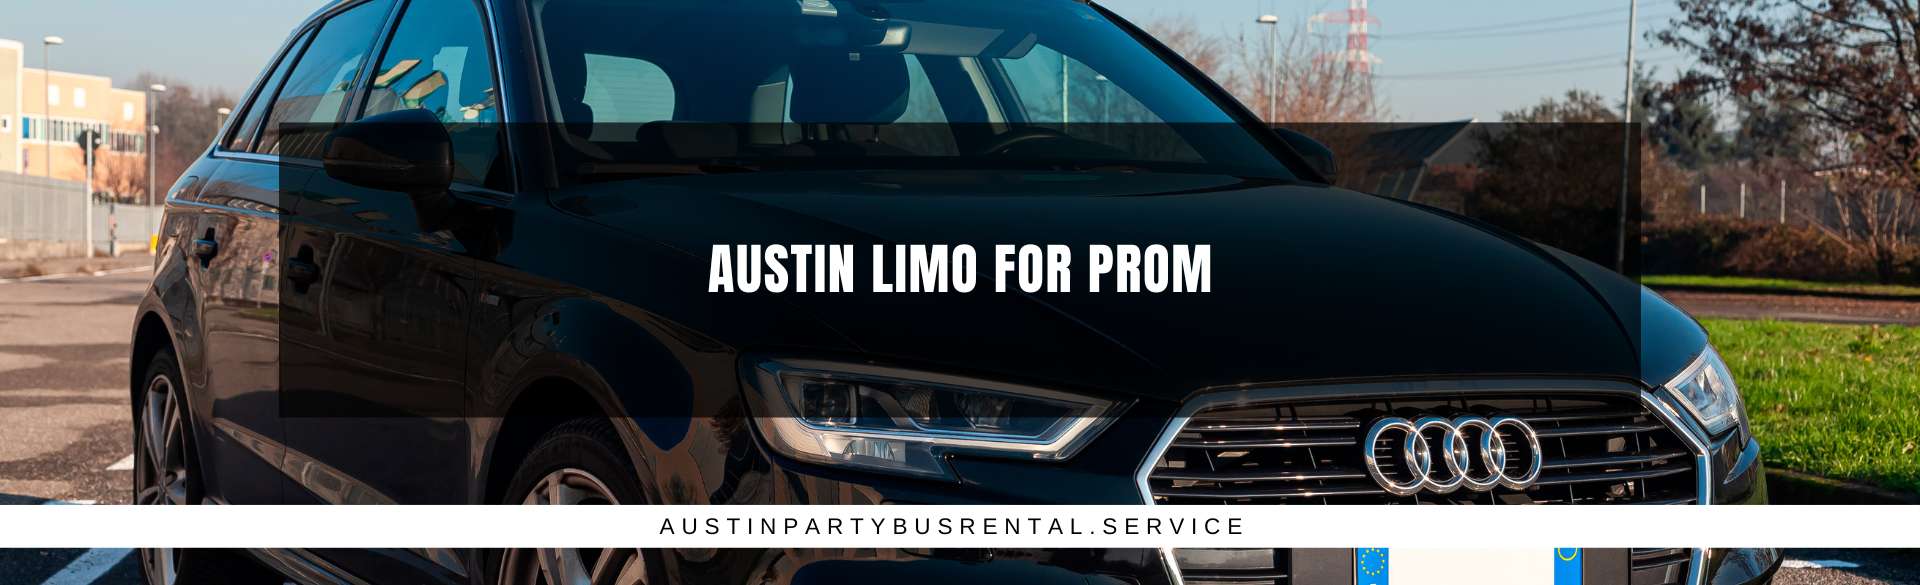 Austin Limo for Prom